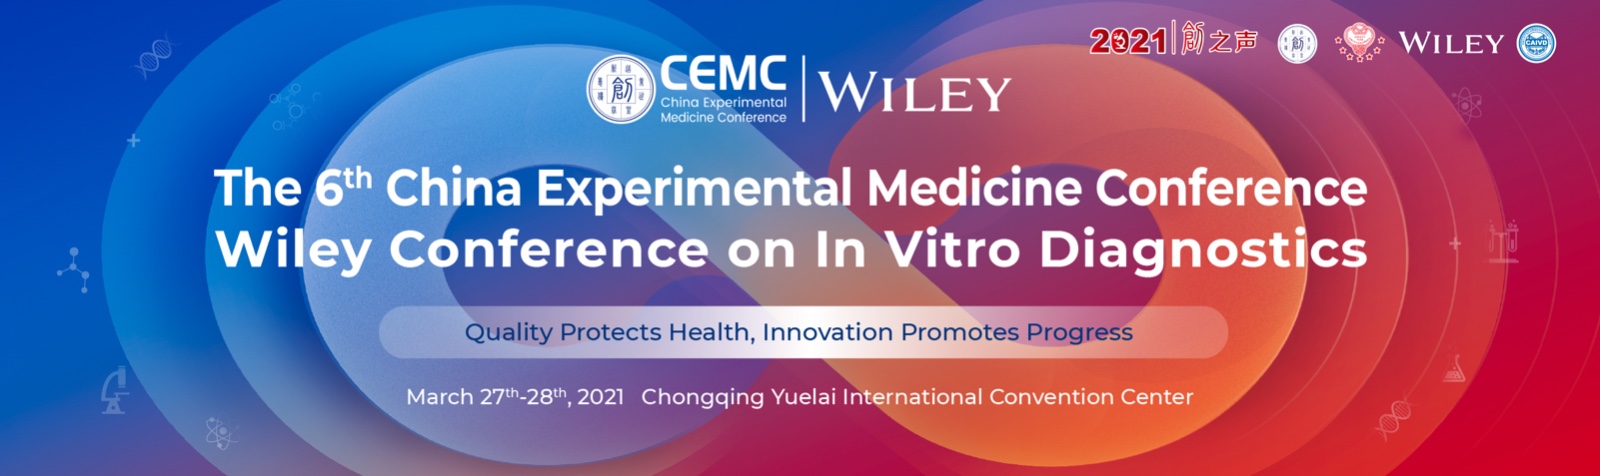 The 6th China Experimental Medicine Conference